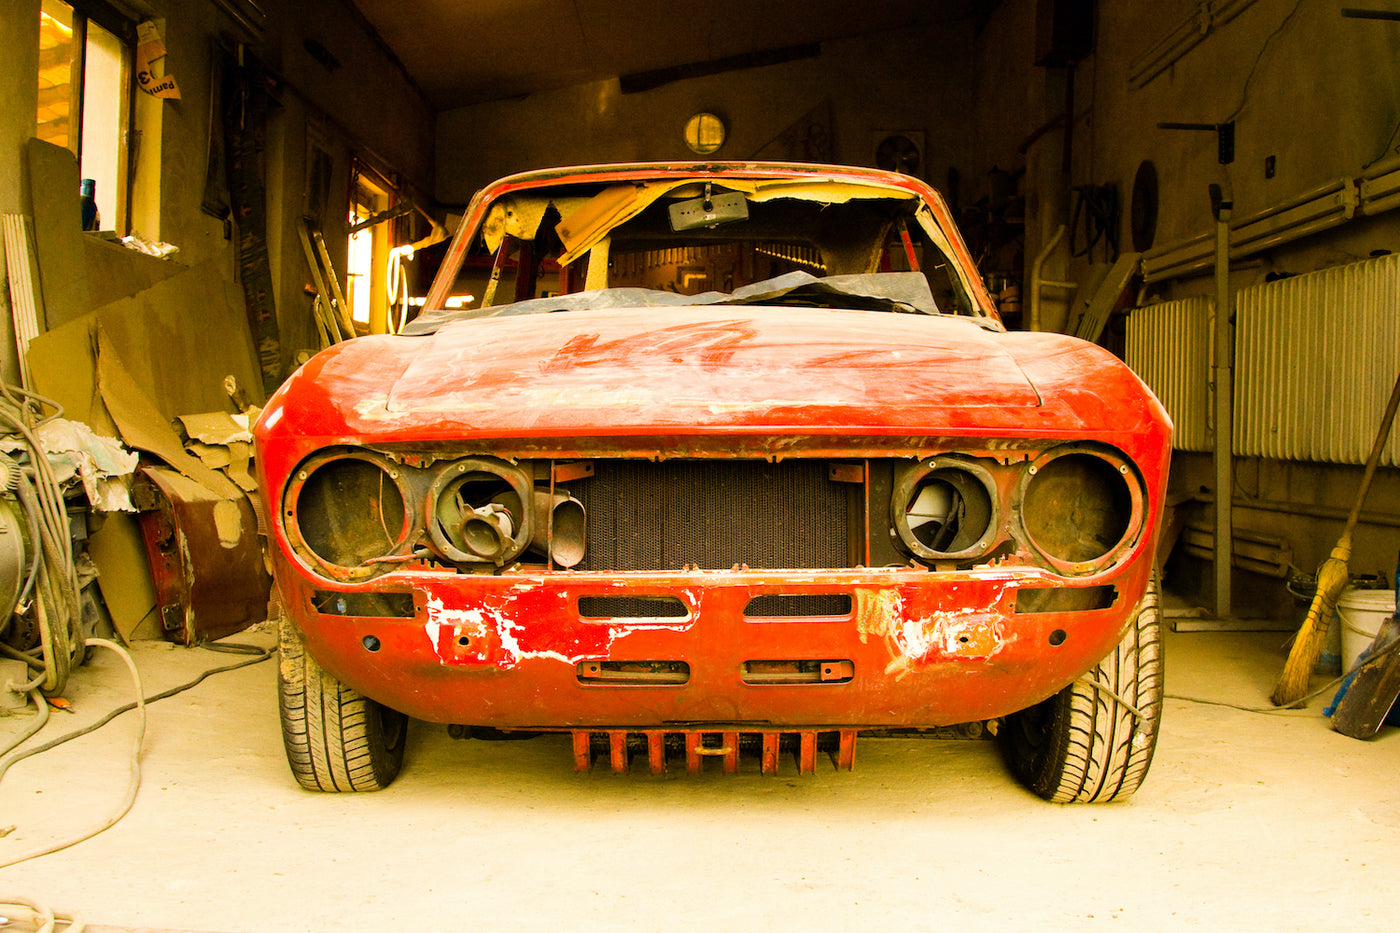 What tools do you need to restore your car?